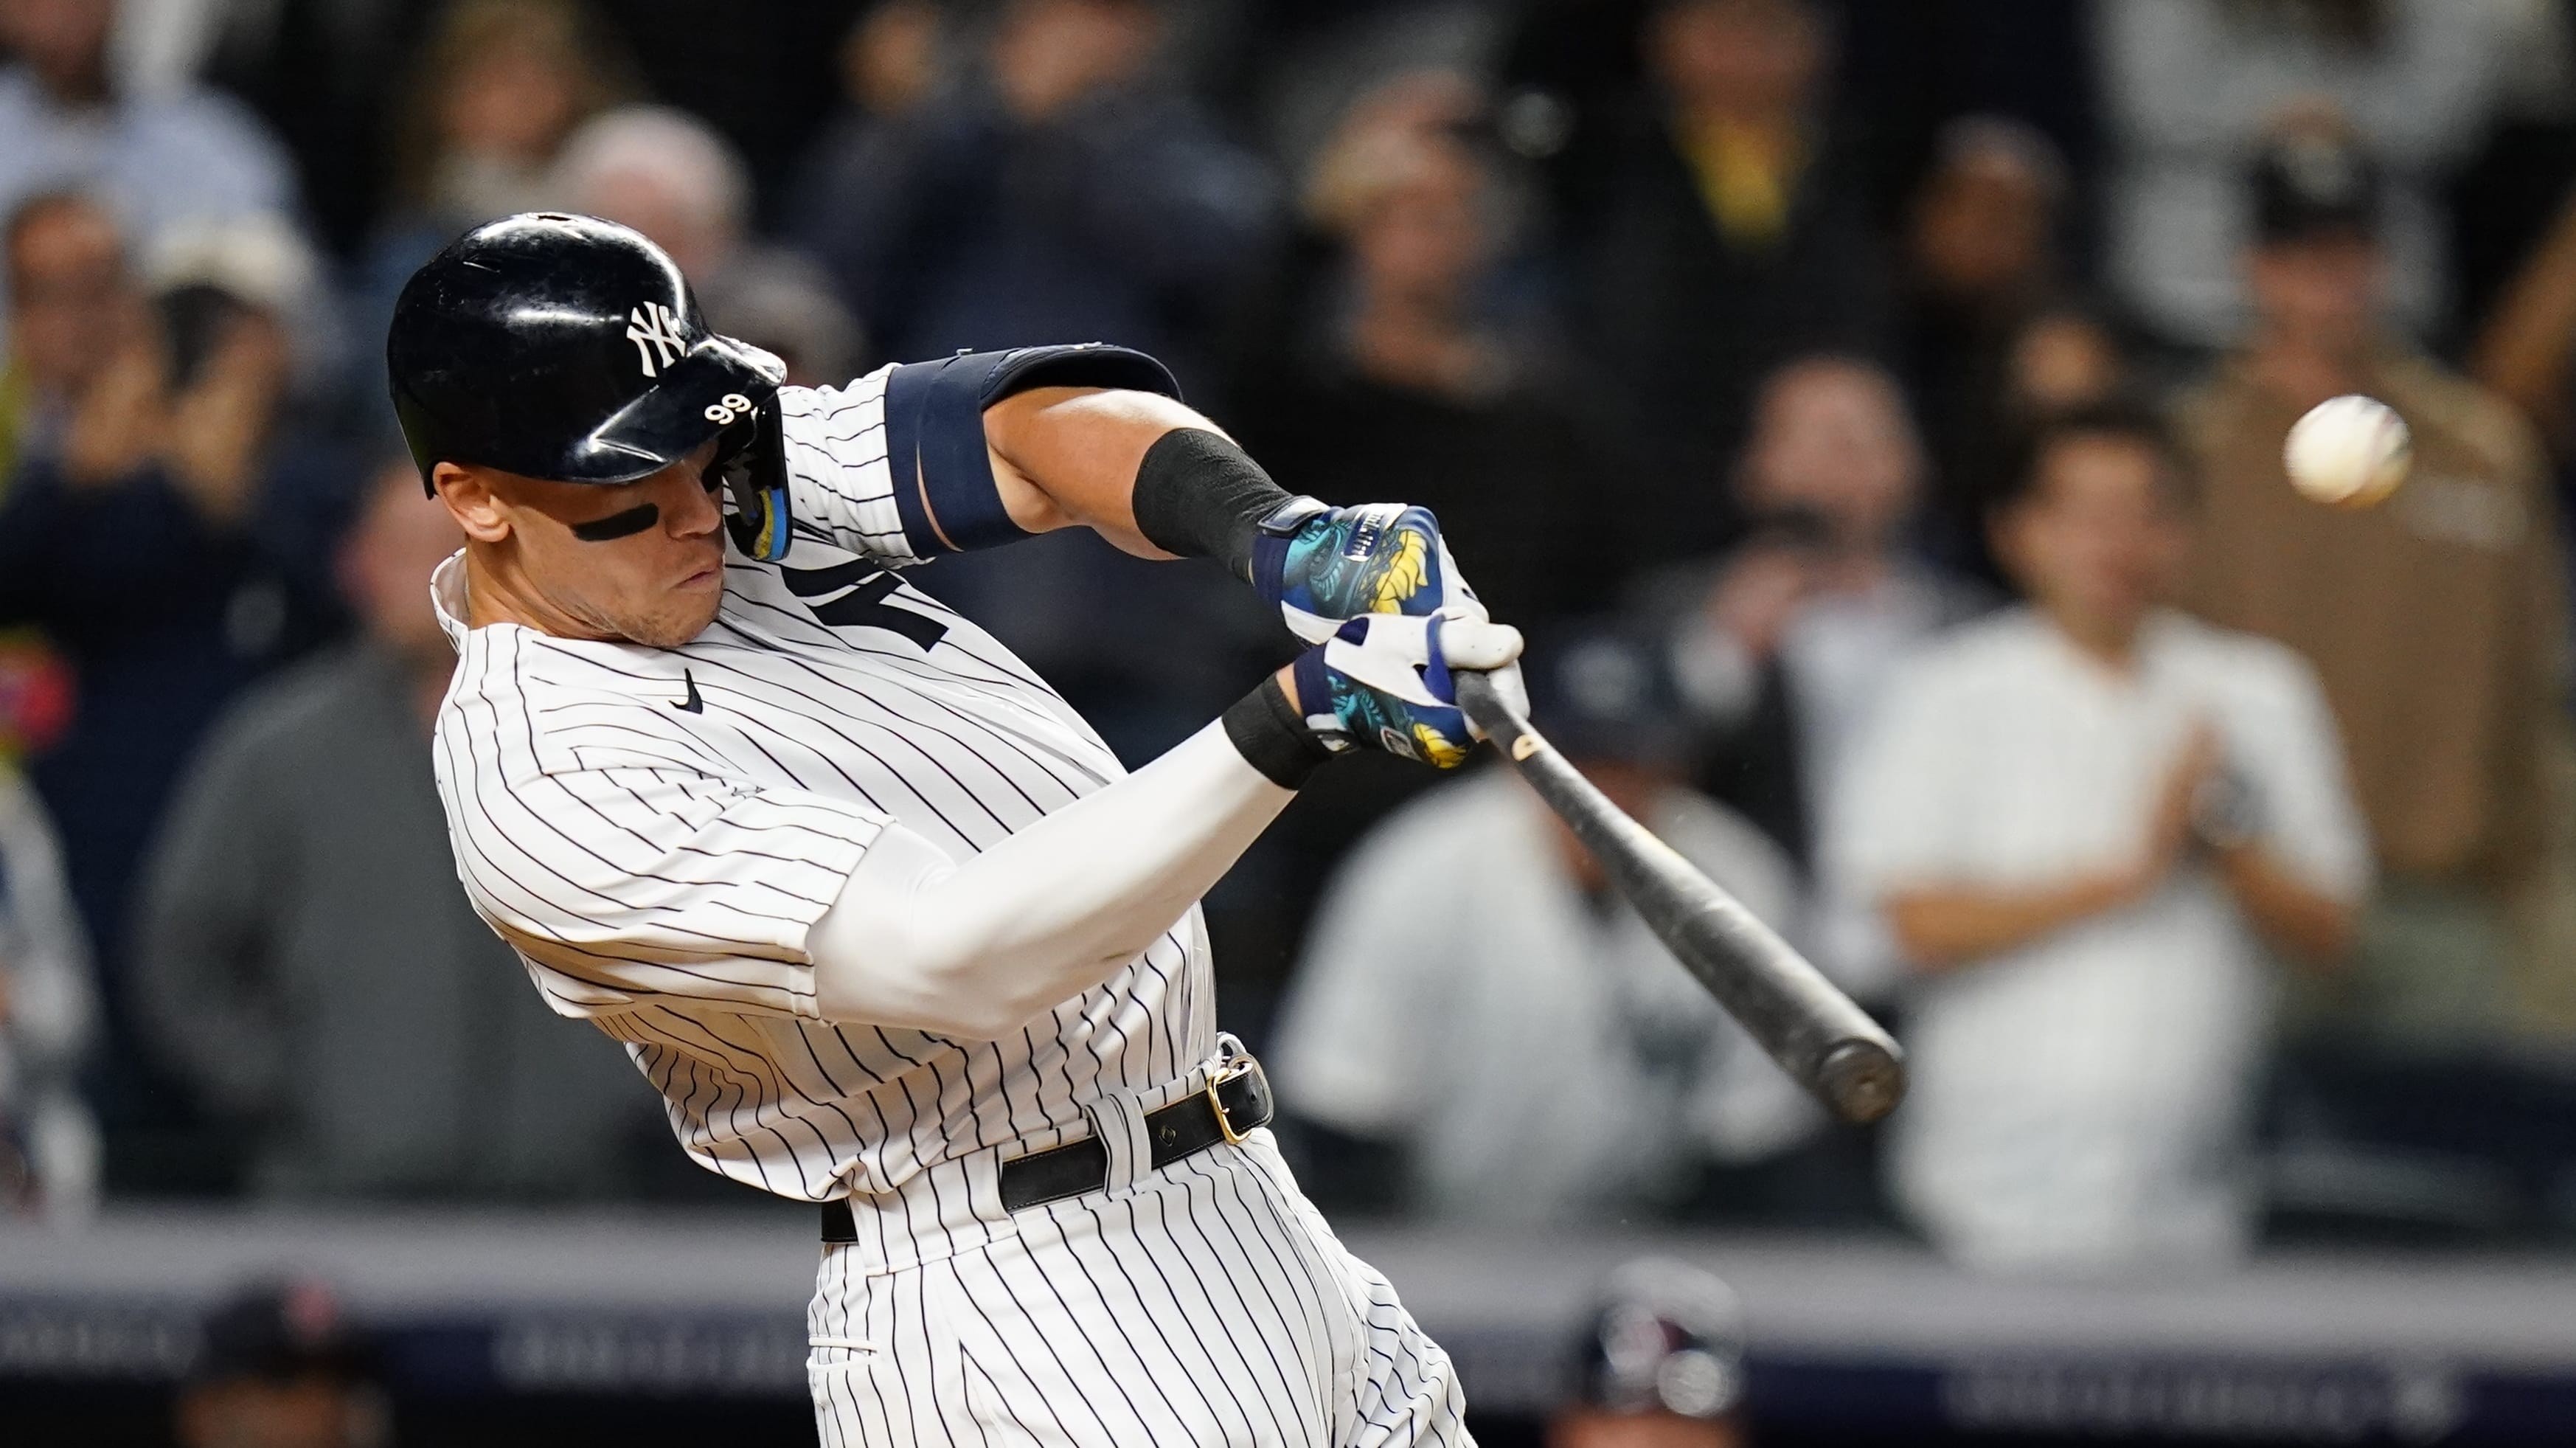 Yankees ticket prices surge to up to $9,000 for Aaron Judge's